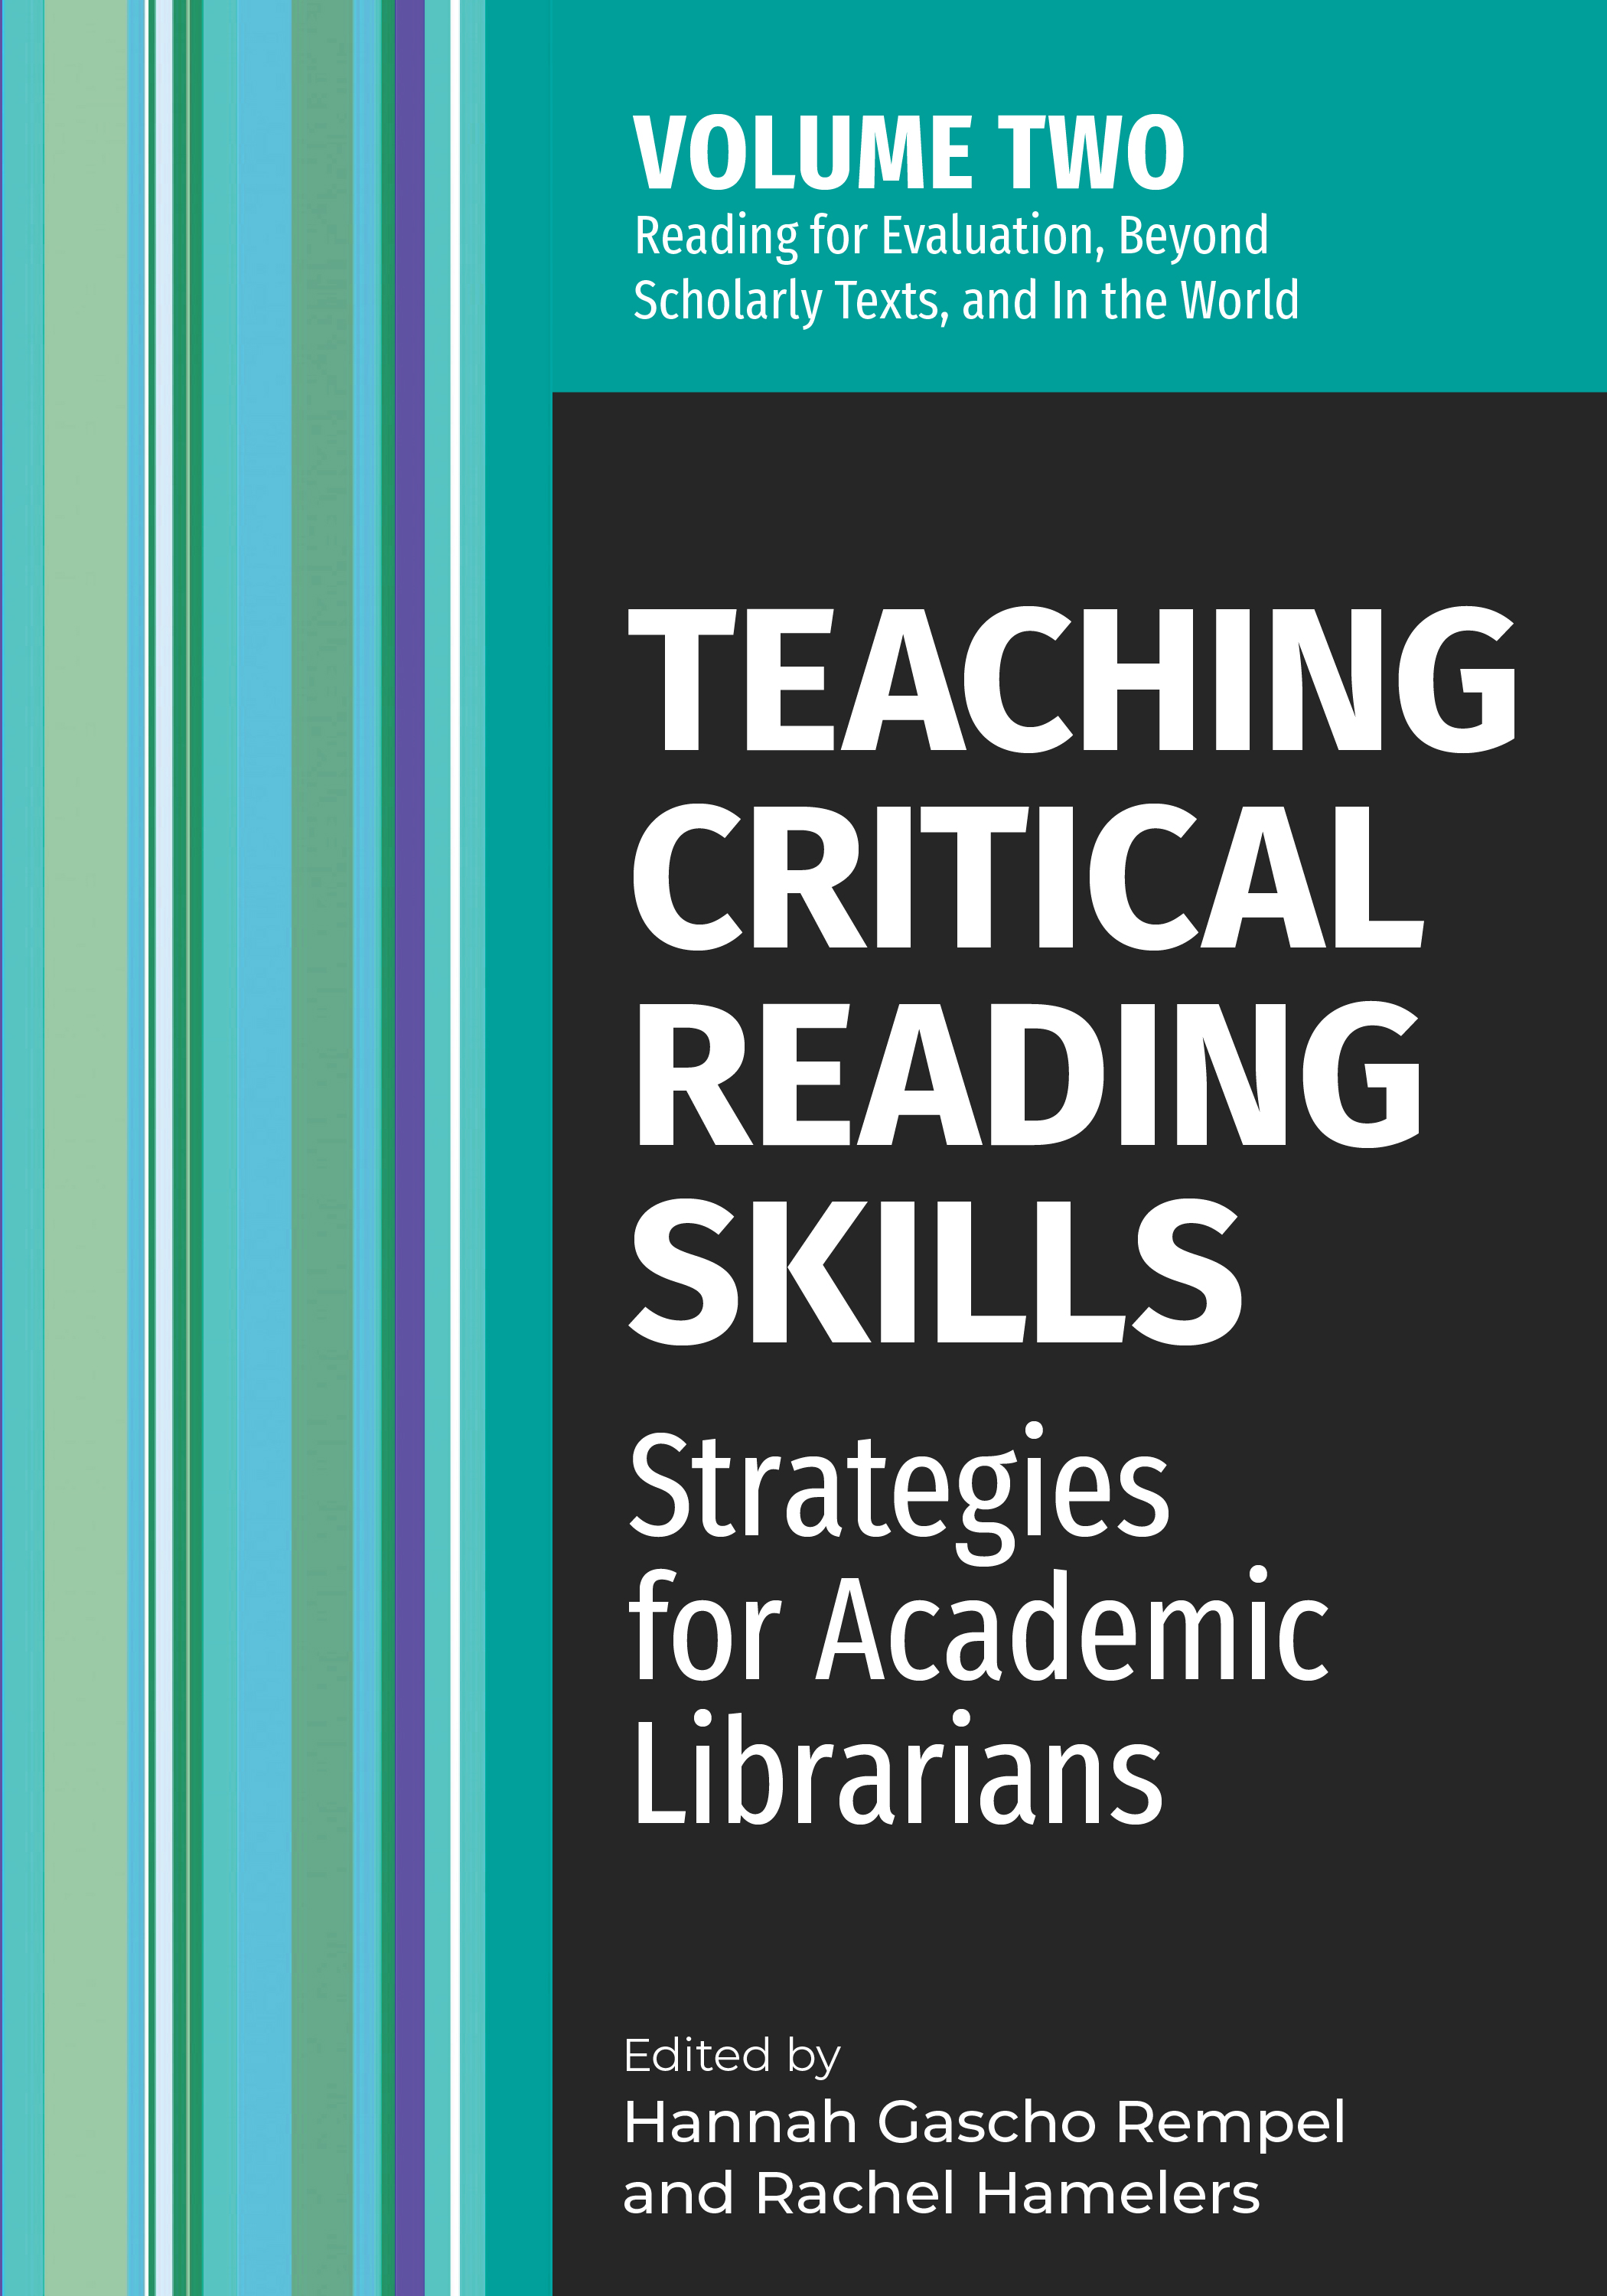 Teaching Critical Reading Skills: Strategies for Academic